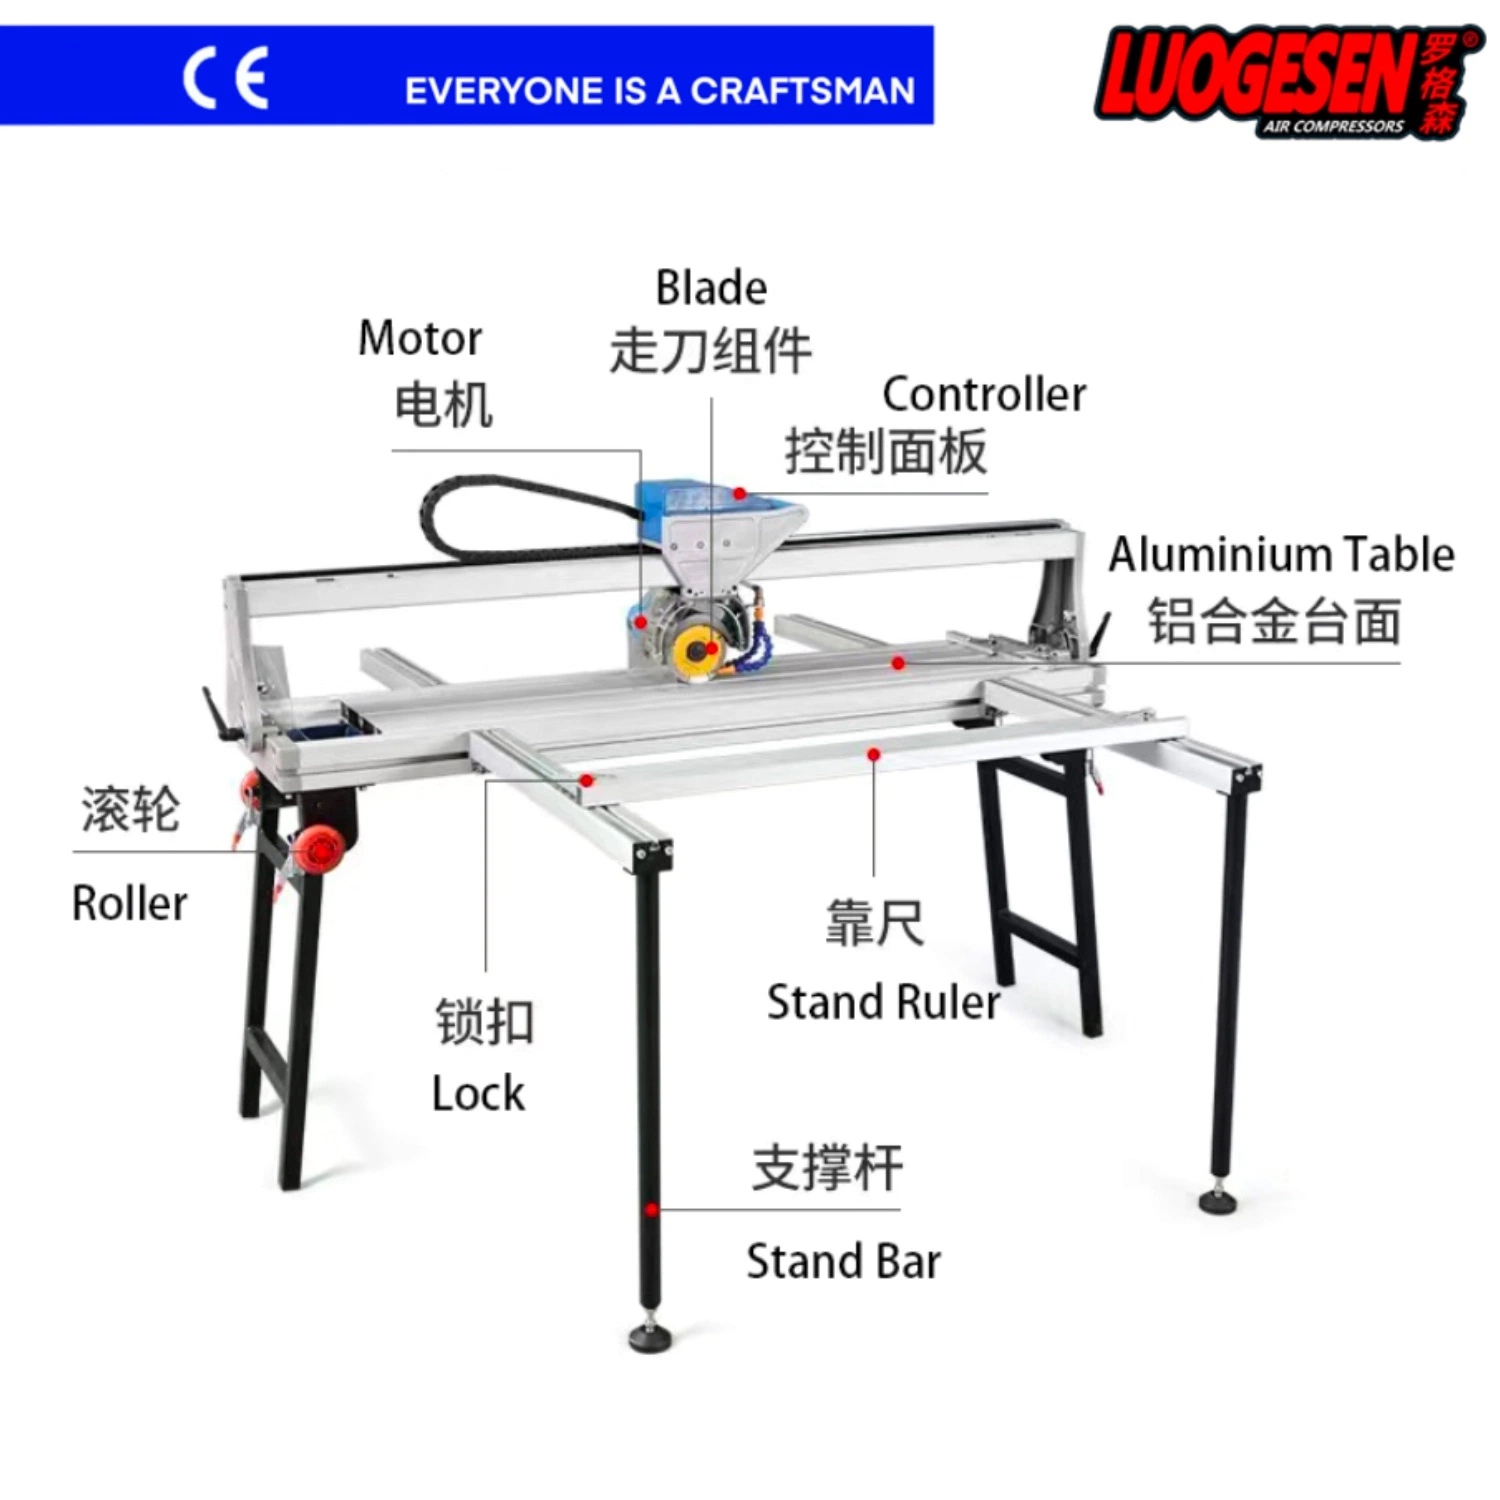 6 Floor Cutting Ceramic Stone Porcelain Portable Power Auto Electric Engraving Laser Construction Equipment Machinery Marble Hand Tool Tile Cutter